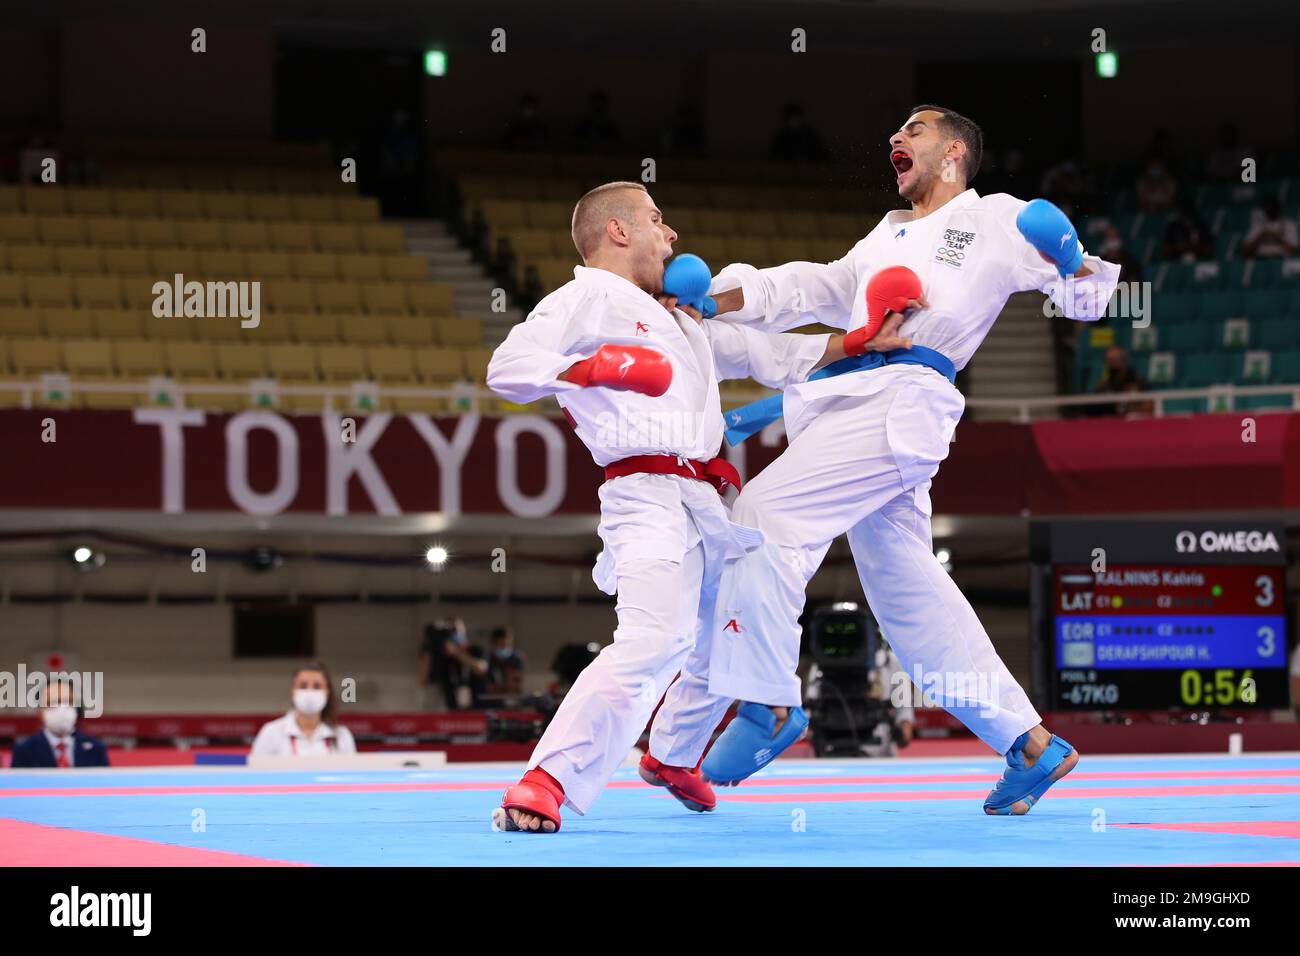 AUG 5, 2021 - TOKYO, JAPAN: Kalvis KALNINS of Latvia (red) and Hamoon DERAFSHIPOUR of the Refugee Olympic Team (blue) compete in the Karate Men's Kumi Stock Photo